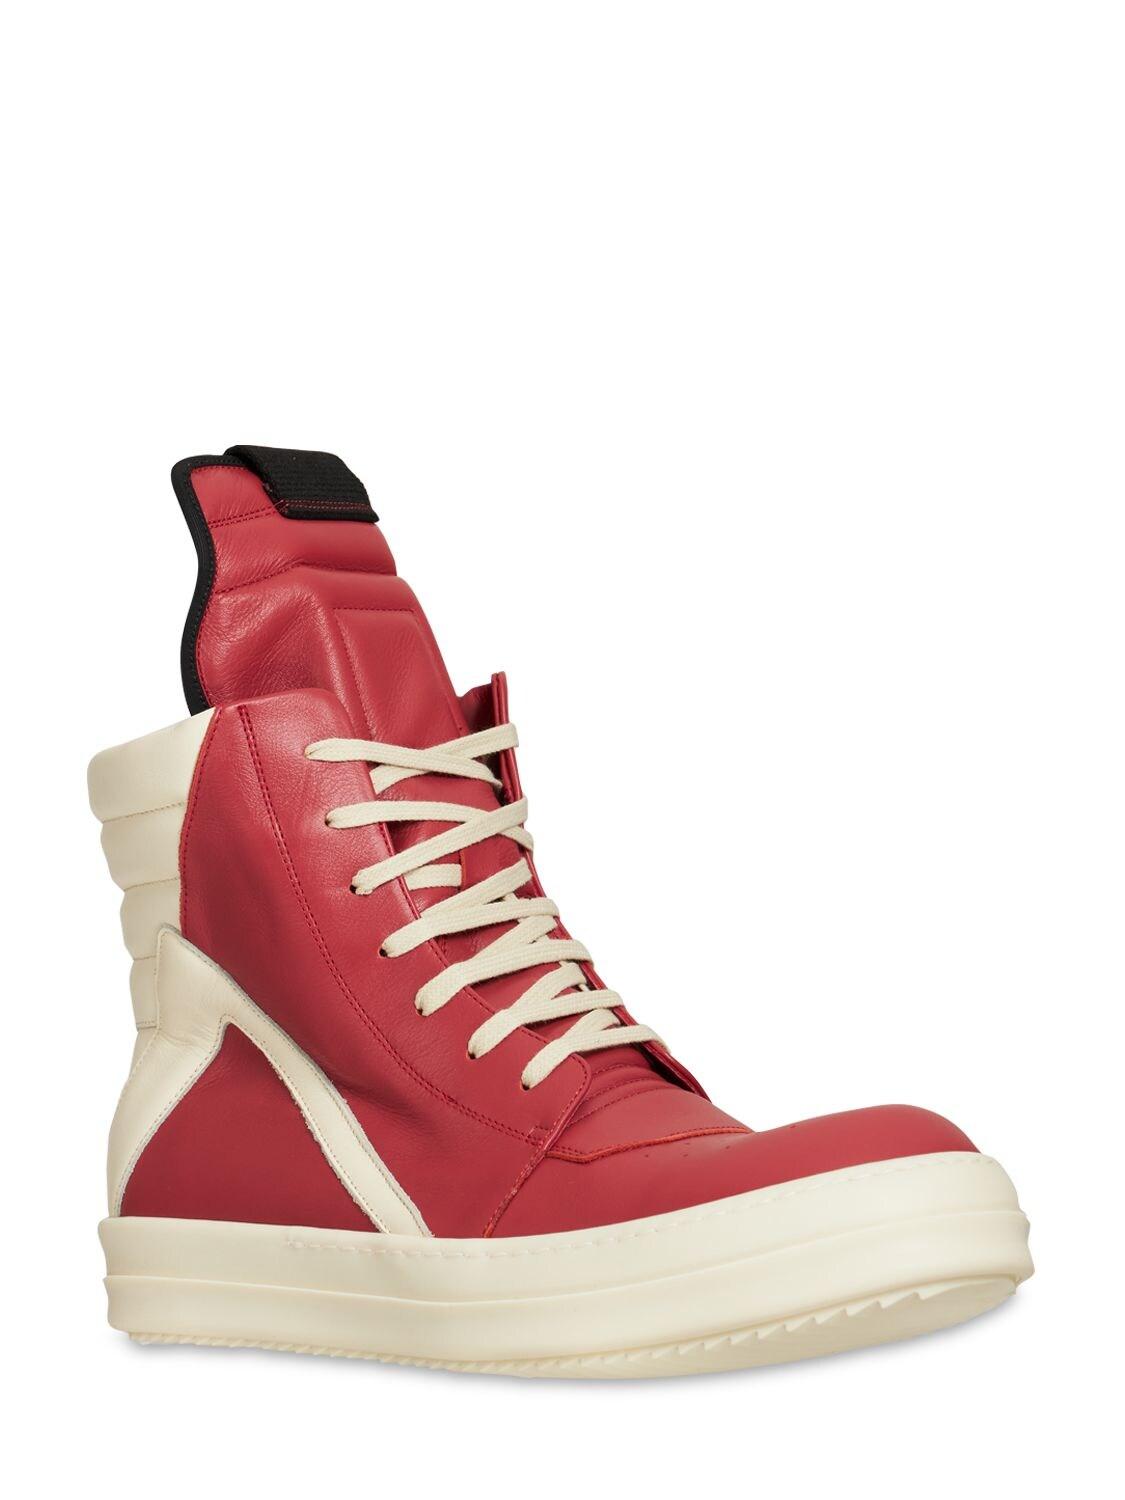 Rick Owens Geobasket Leather High Top Sneakers in Red for Men | Lyst